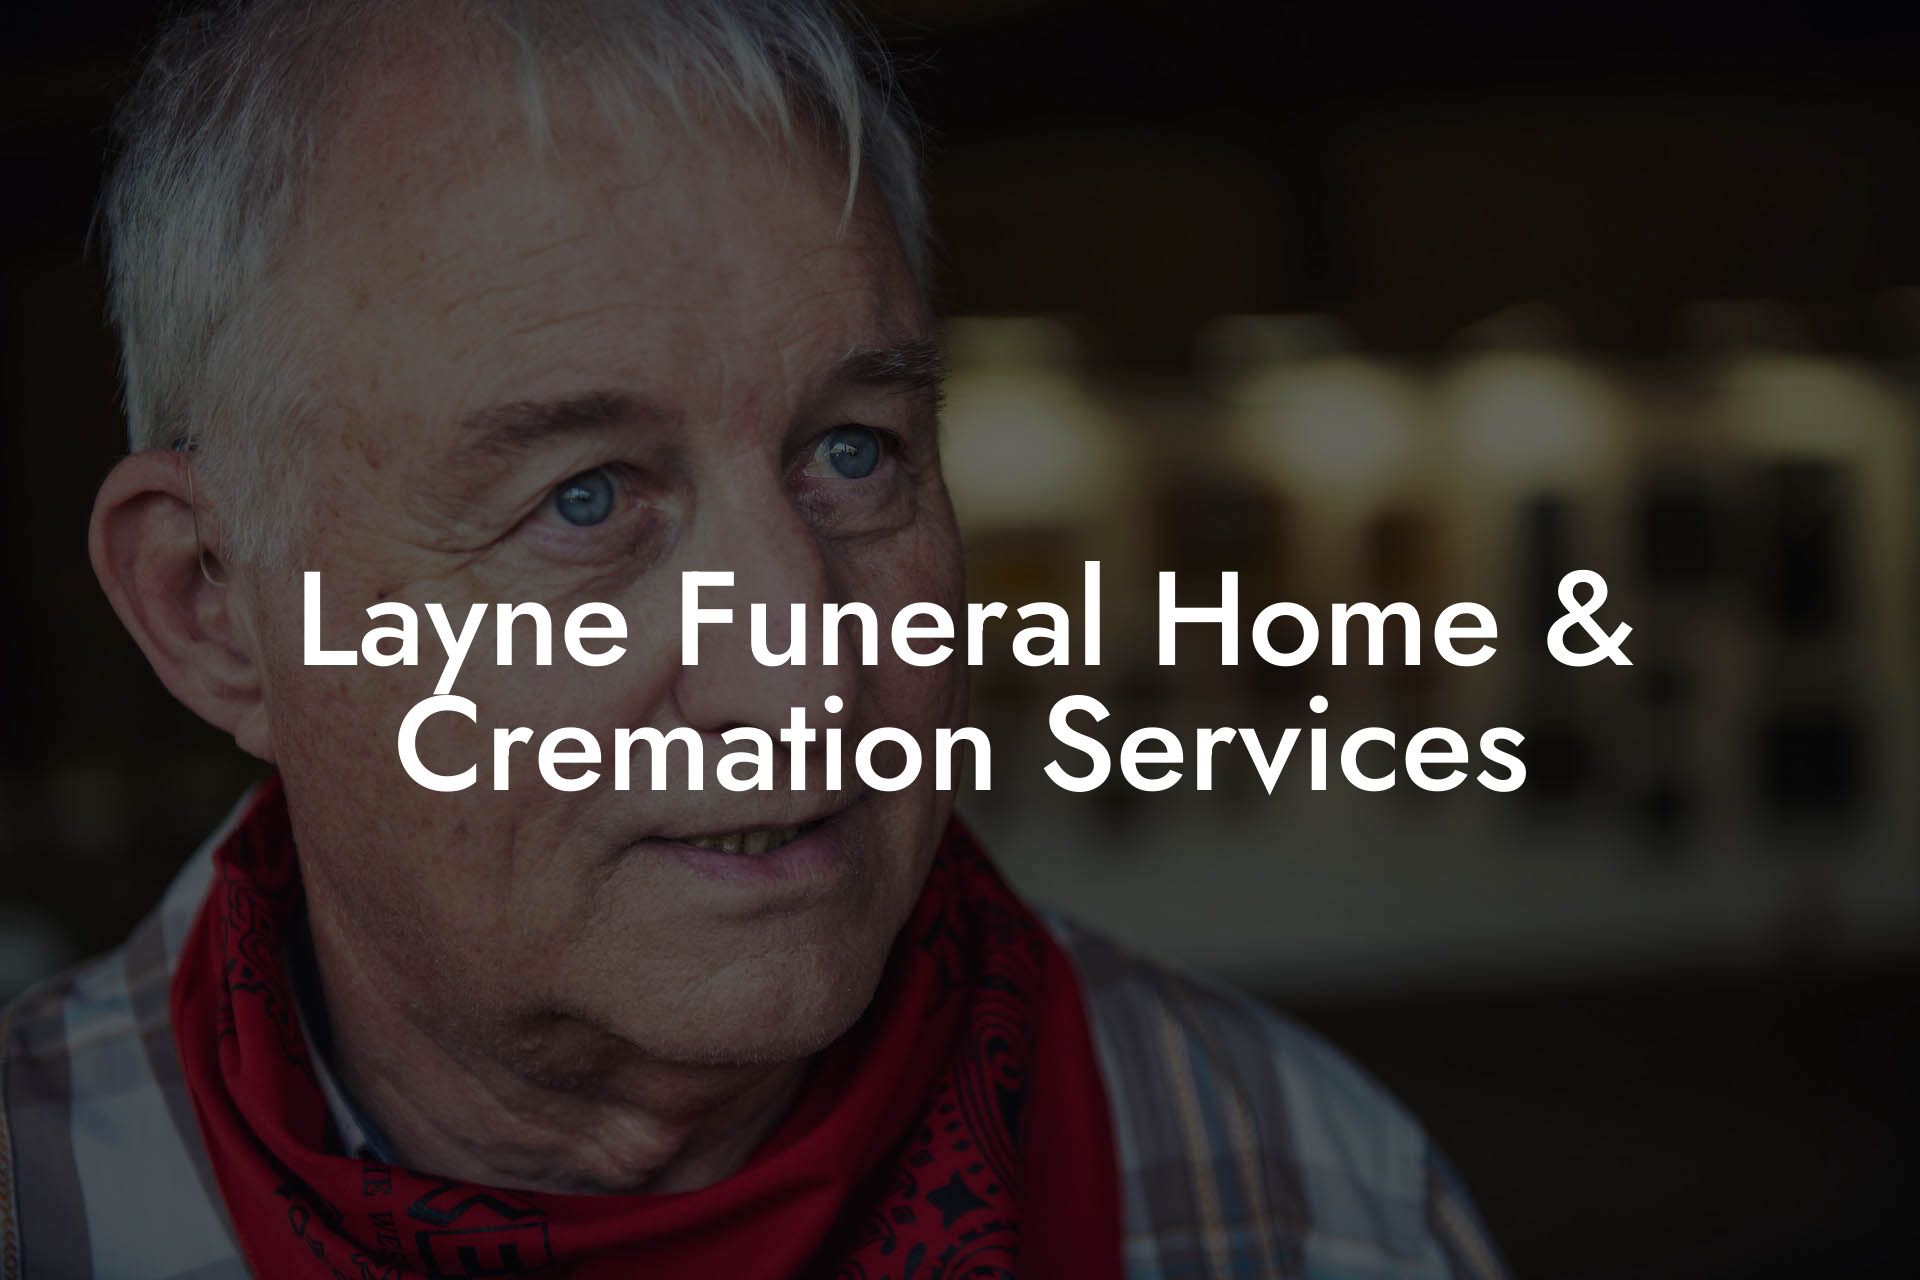 Layne Funeral Home & Cremation Services Eulogy Assistant